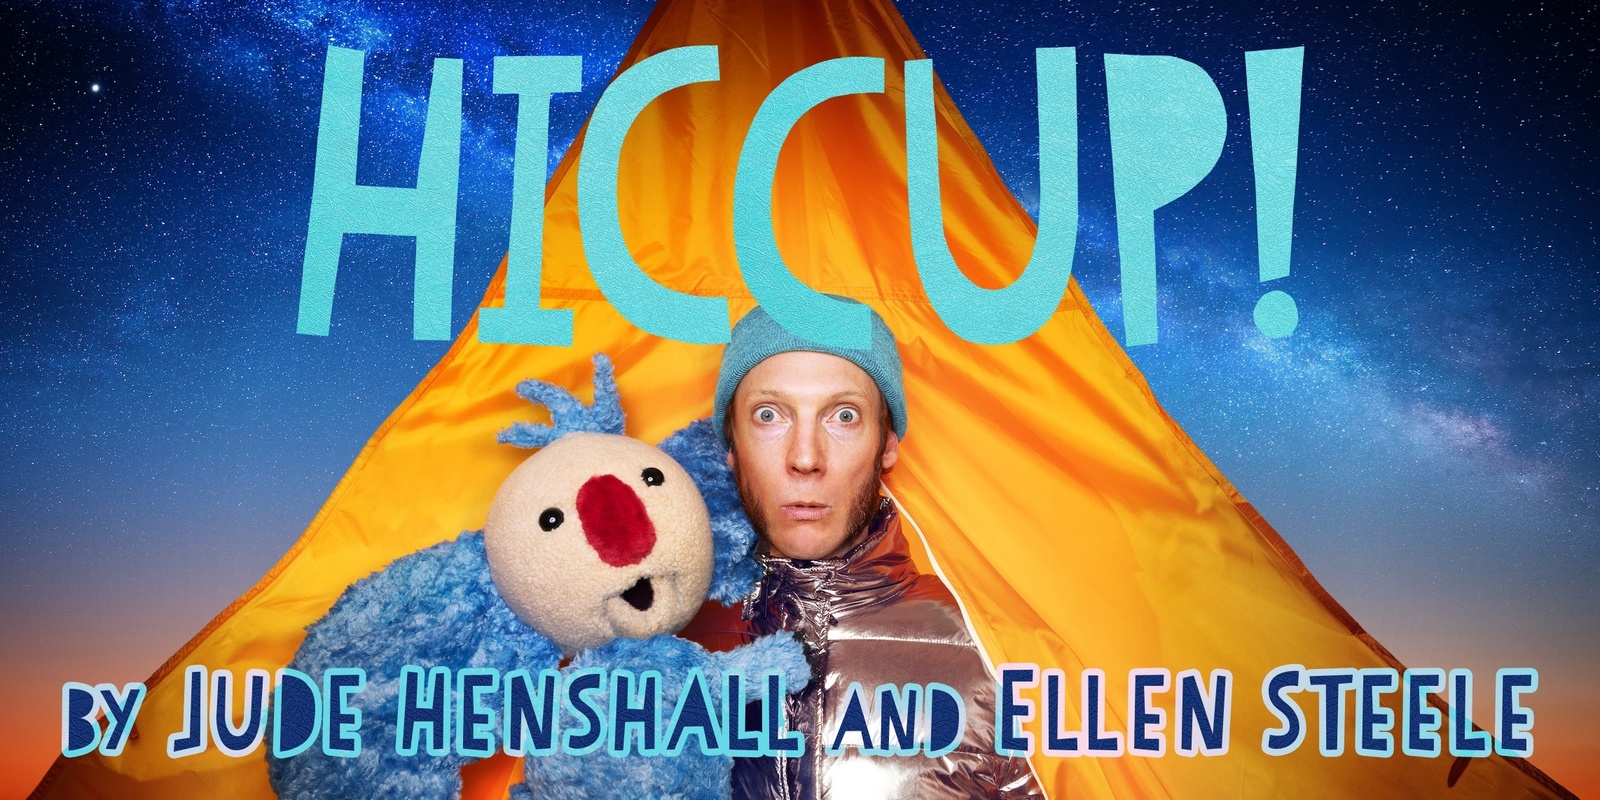 Banner image for HICCUP